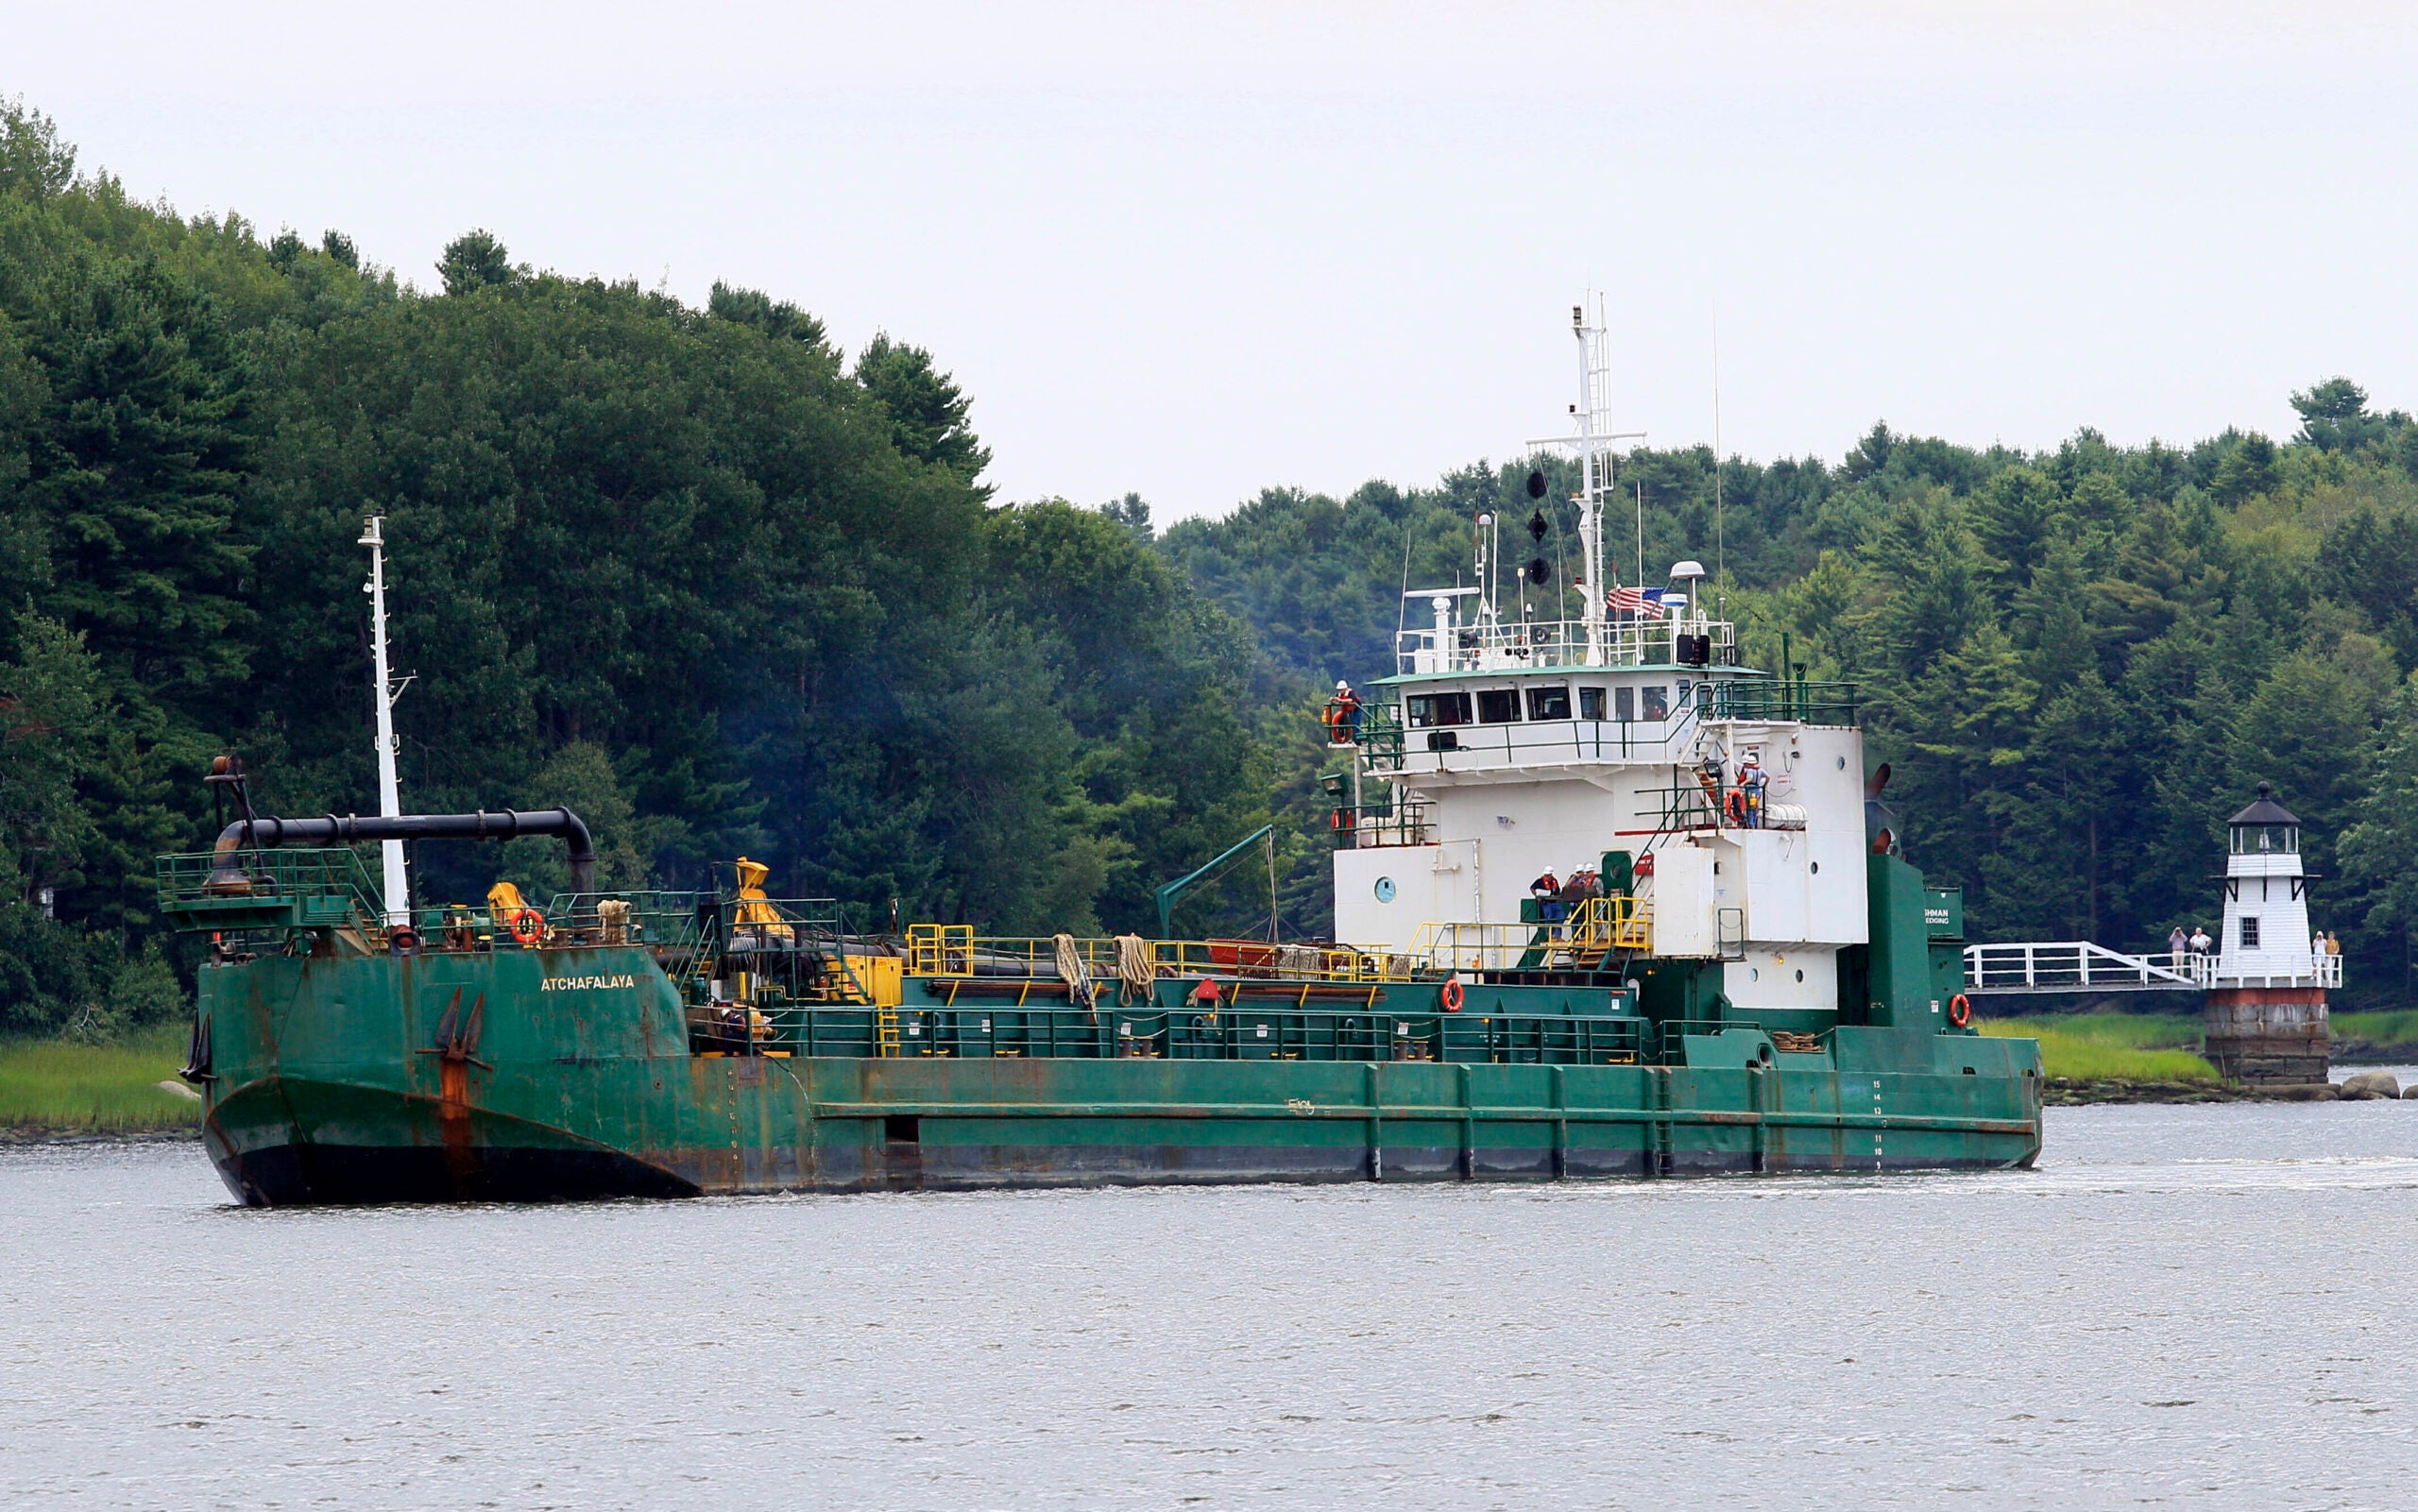 Spectators watch as a dredger works to deepen a shallow channel in the Kennebec River in Maine.